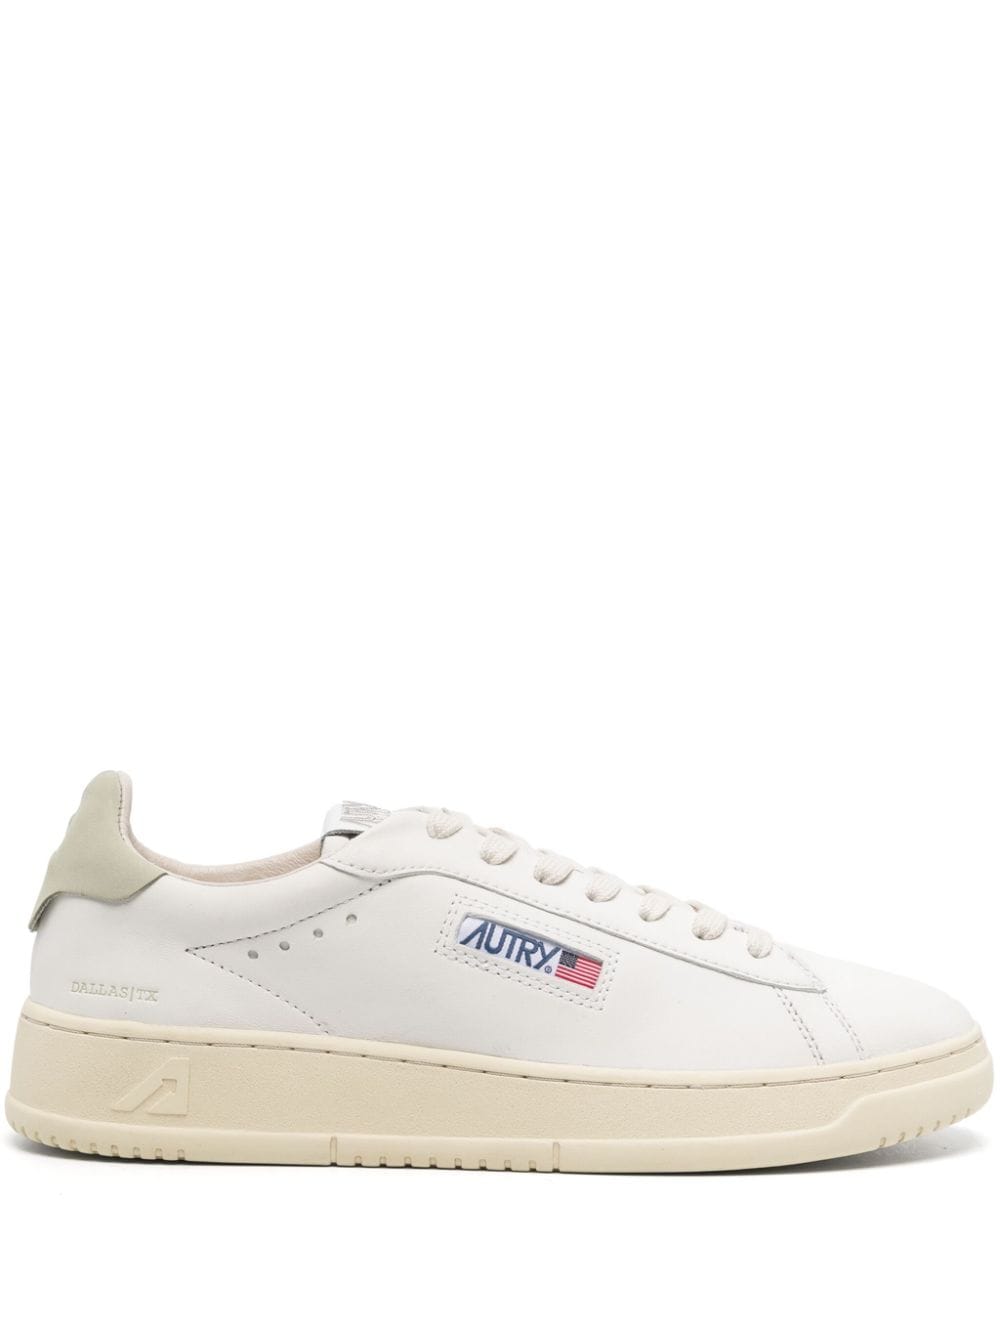 Autry Dallas Leather Sneakers In White